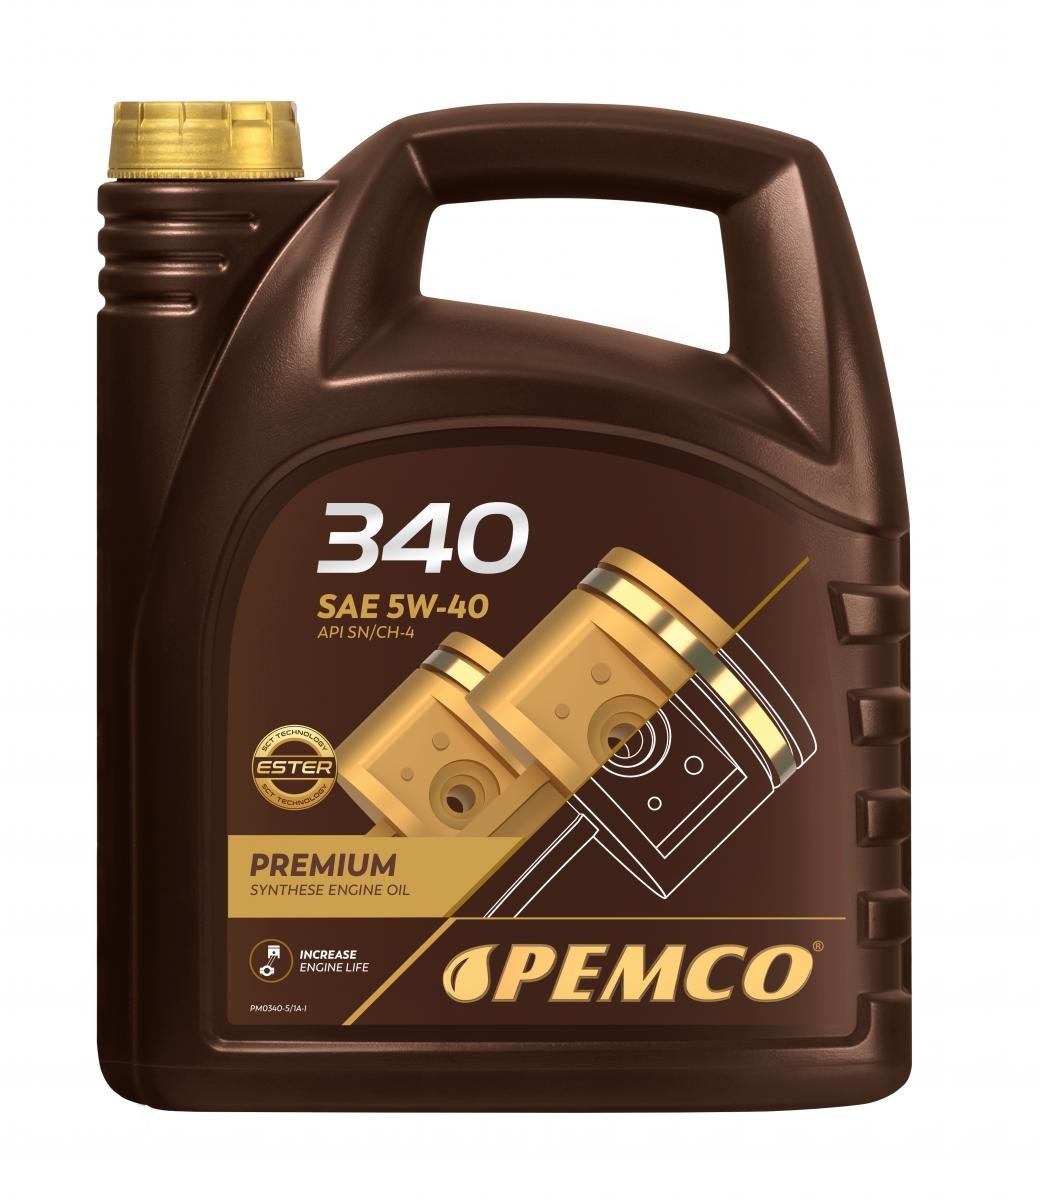 Vauxhall Engine oil PEMCO PM0340-5 at a good price